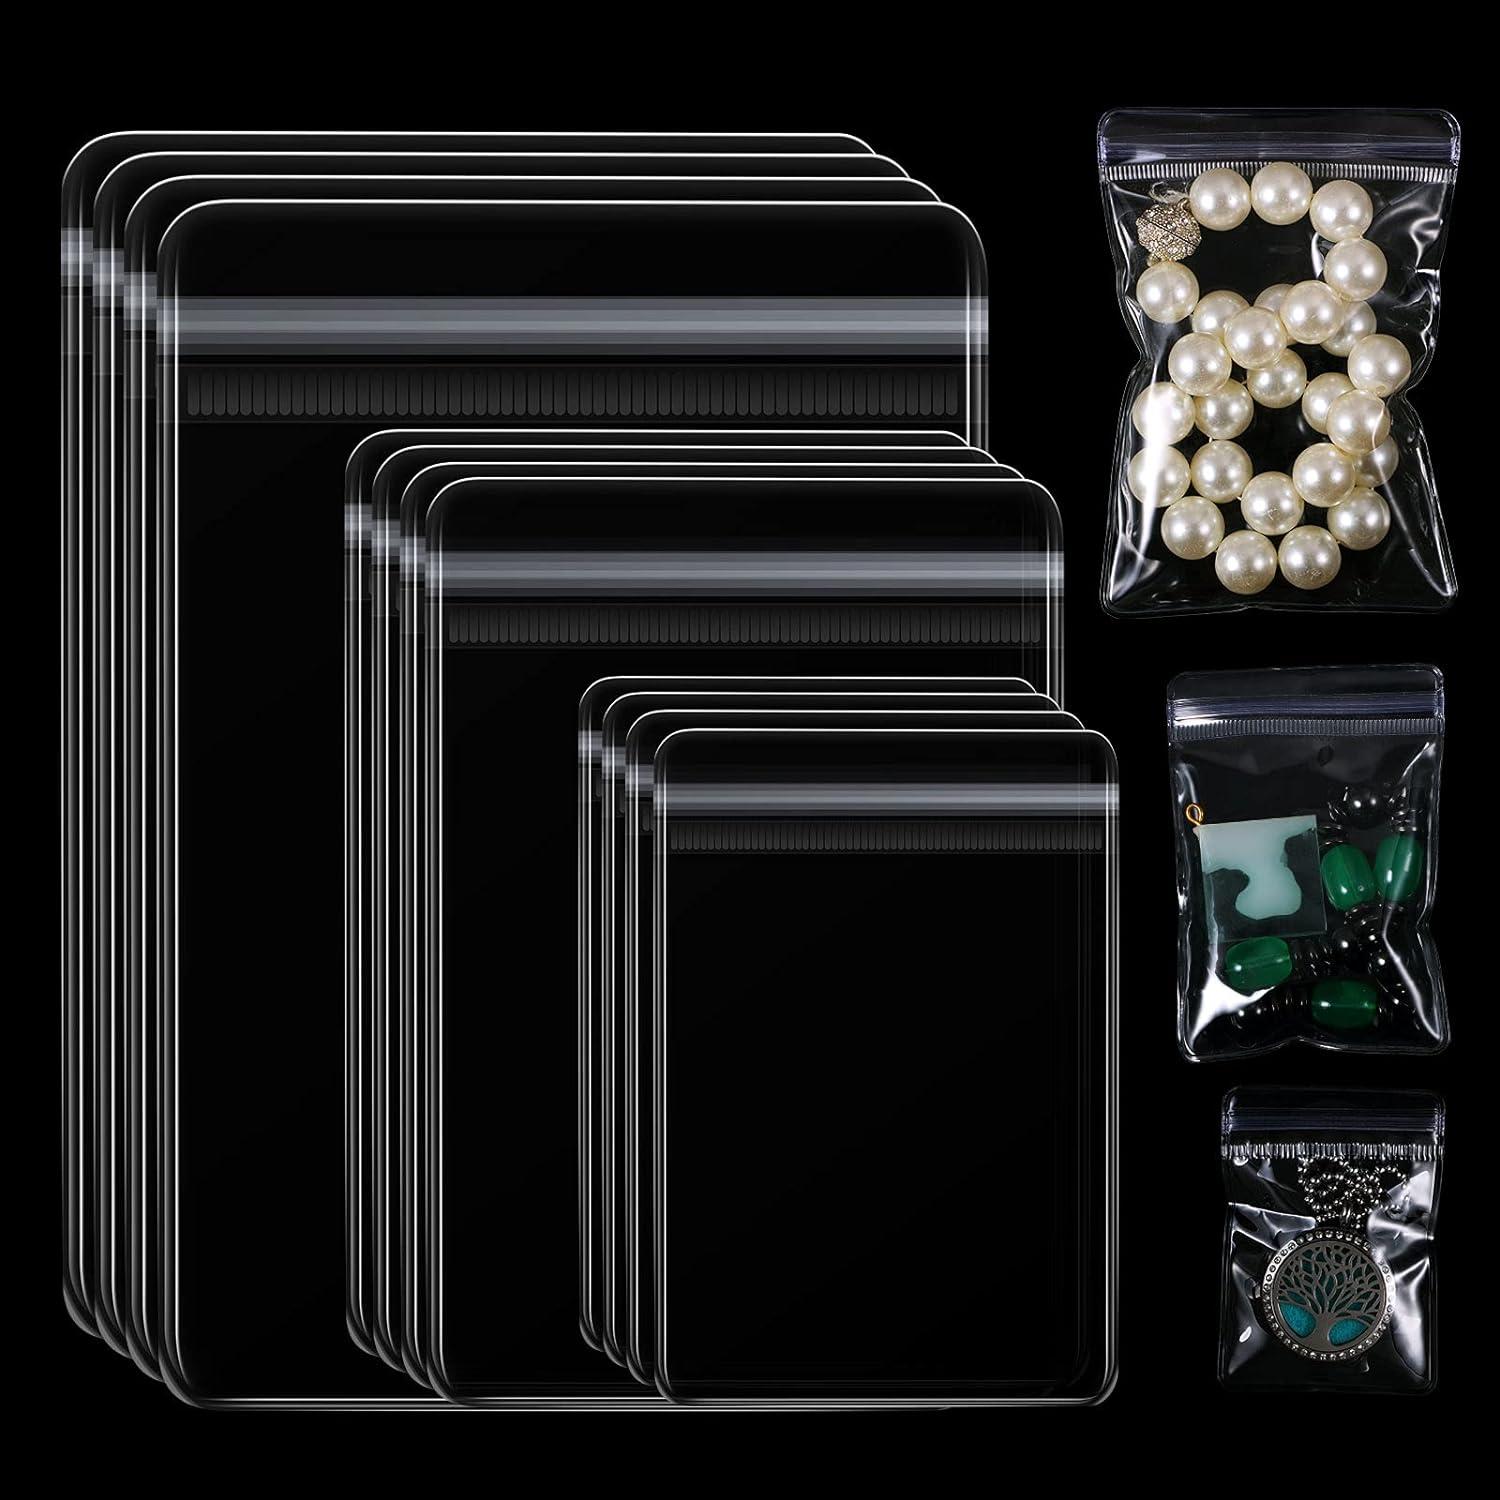  Glarks 160Pcs 5 Size PVC Self Seal Jewelry Bags Plastic Zipper  Bag Clear Storage Bags Jewelry Packaging Pouch with 30Pcs Anti Tarnish Tabs  Strips Kit for Holding Jewelry Necklace Earring Ring